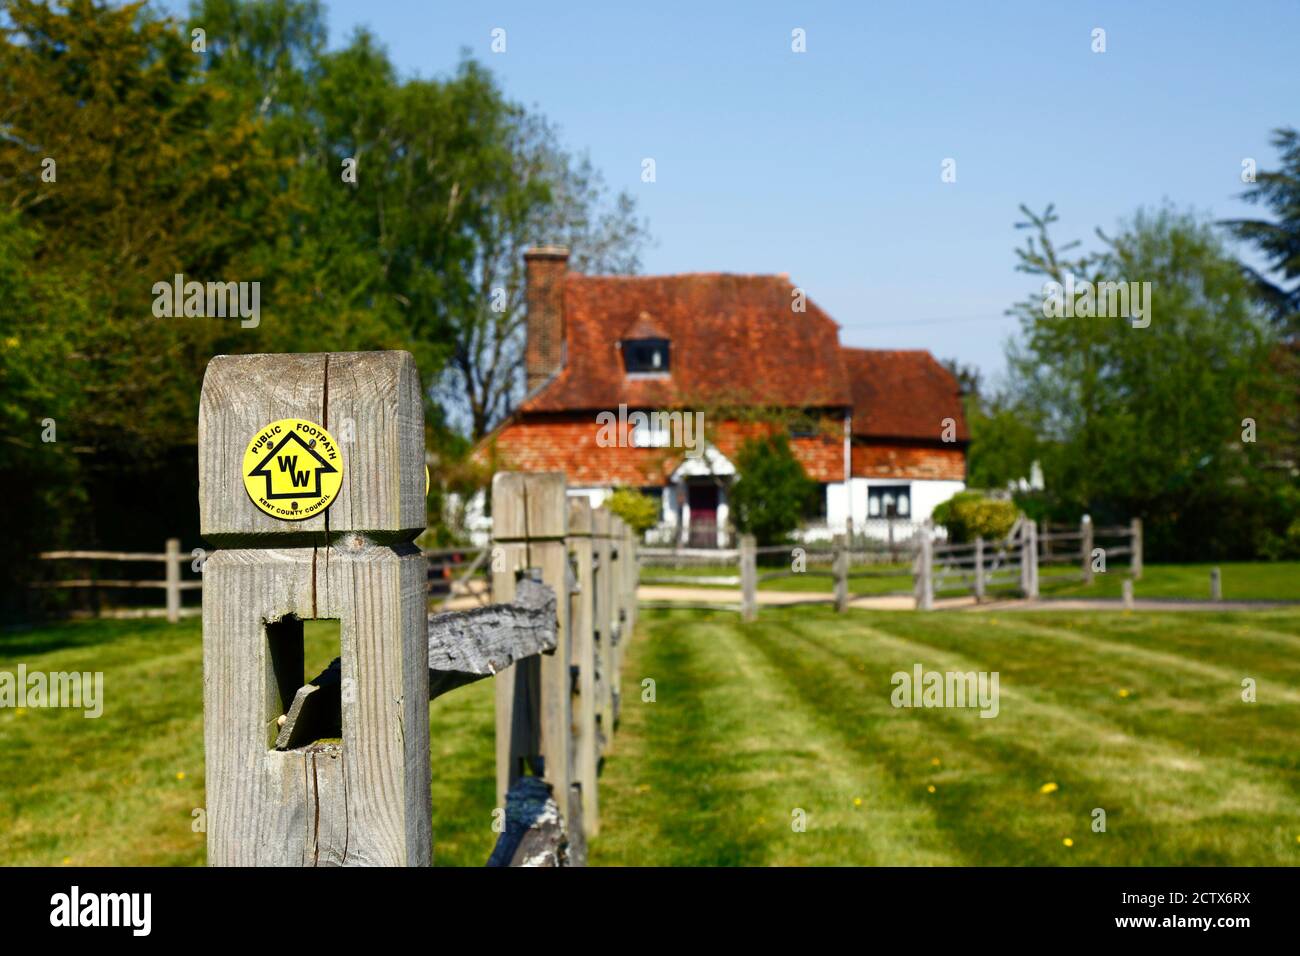 Manor Farm Cottage (a small 17th century farmhouse) and Wealdway long distance footpath sign on fencepost, Lower Haysden, Kent, England Stock Photo